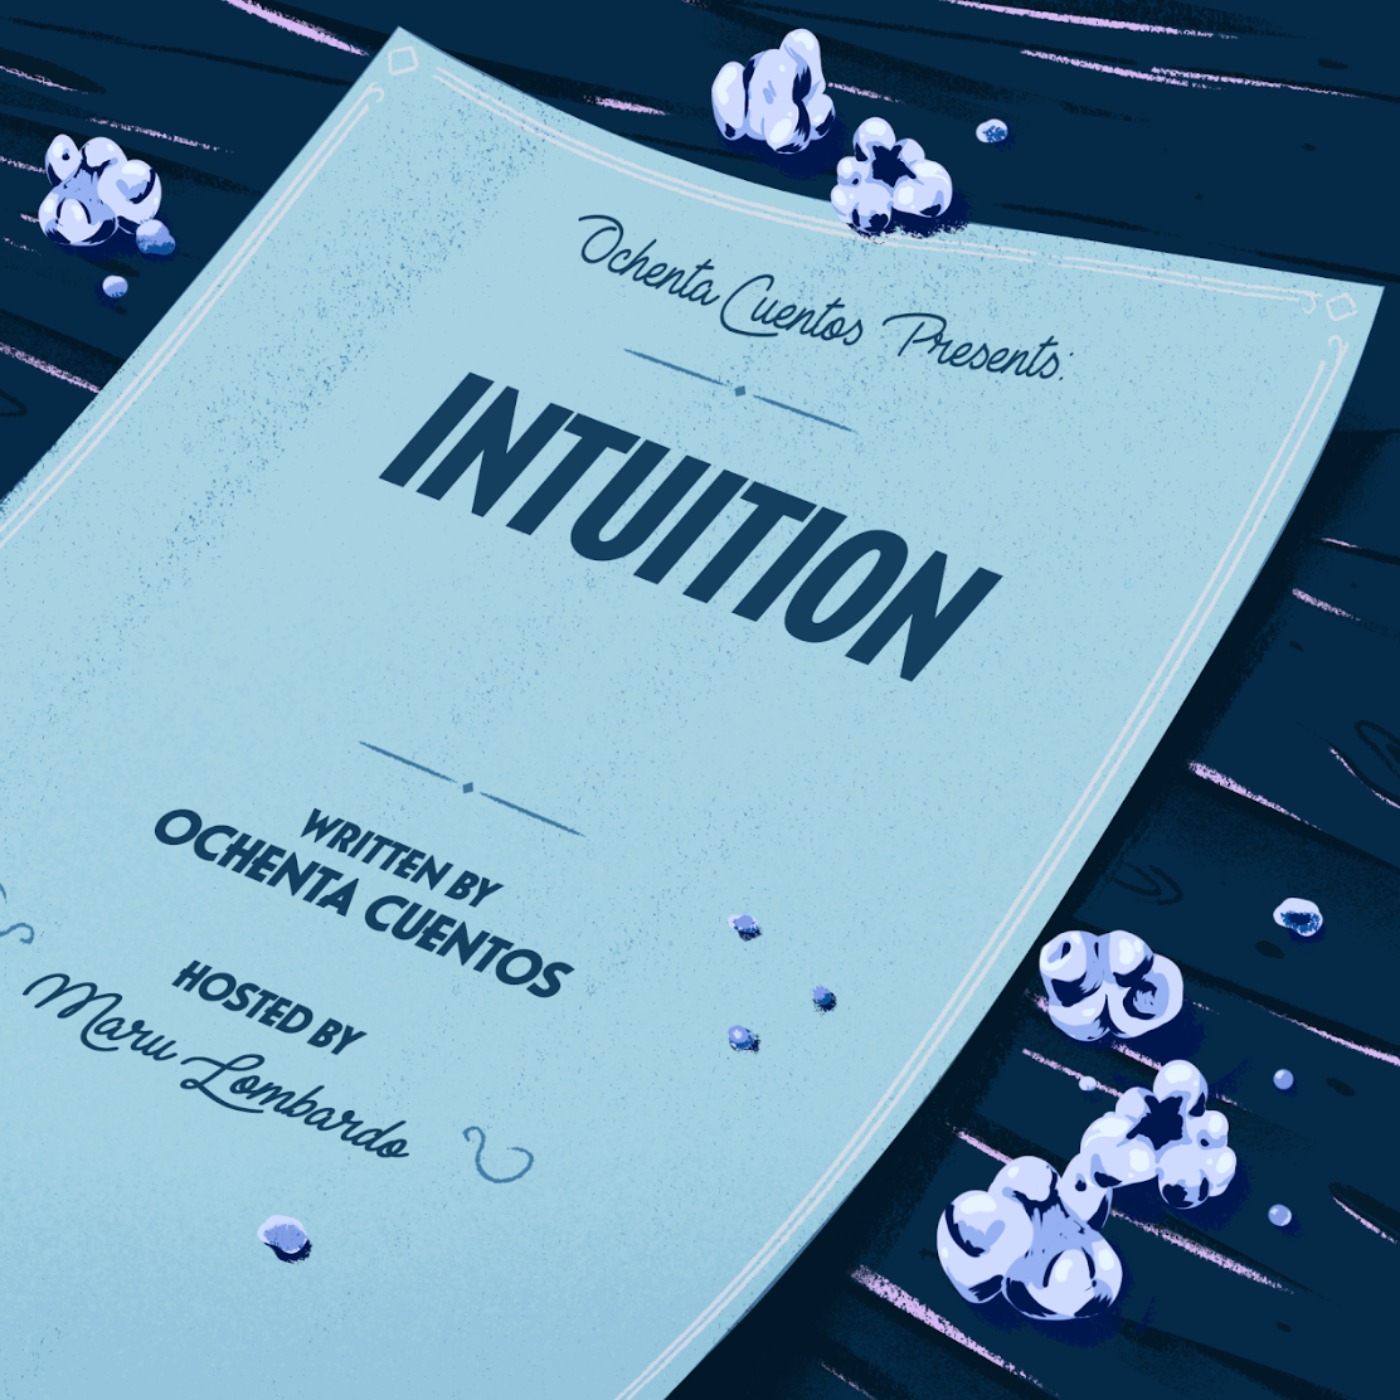 Intuition: The End Of A Show